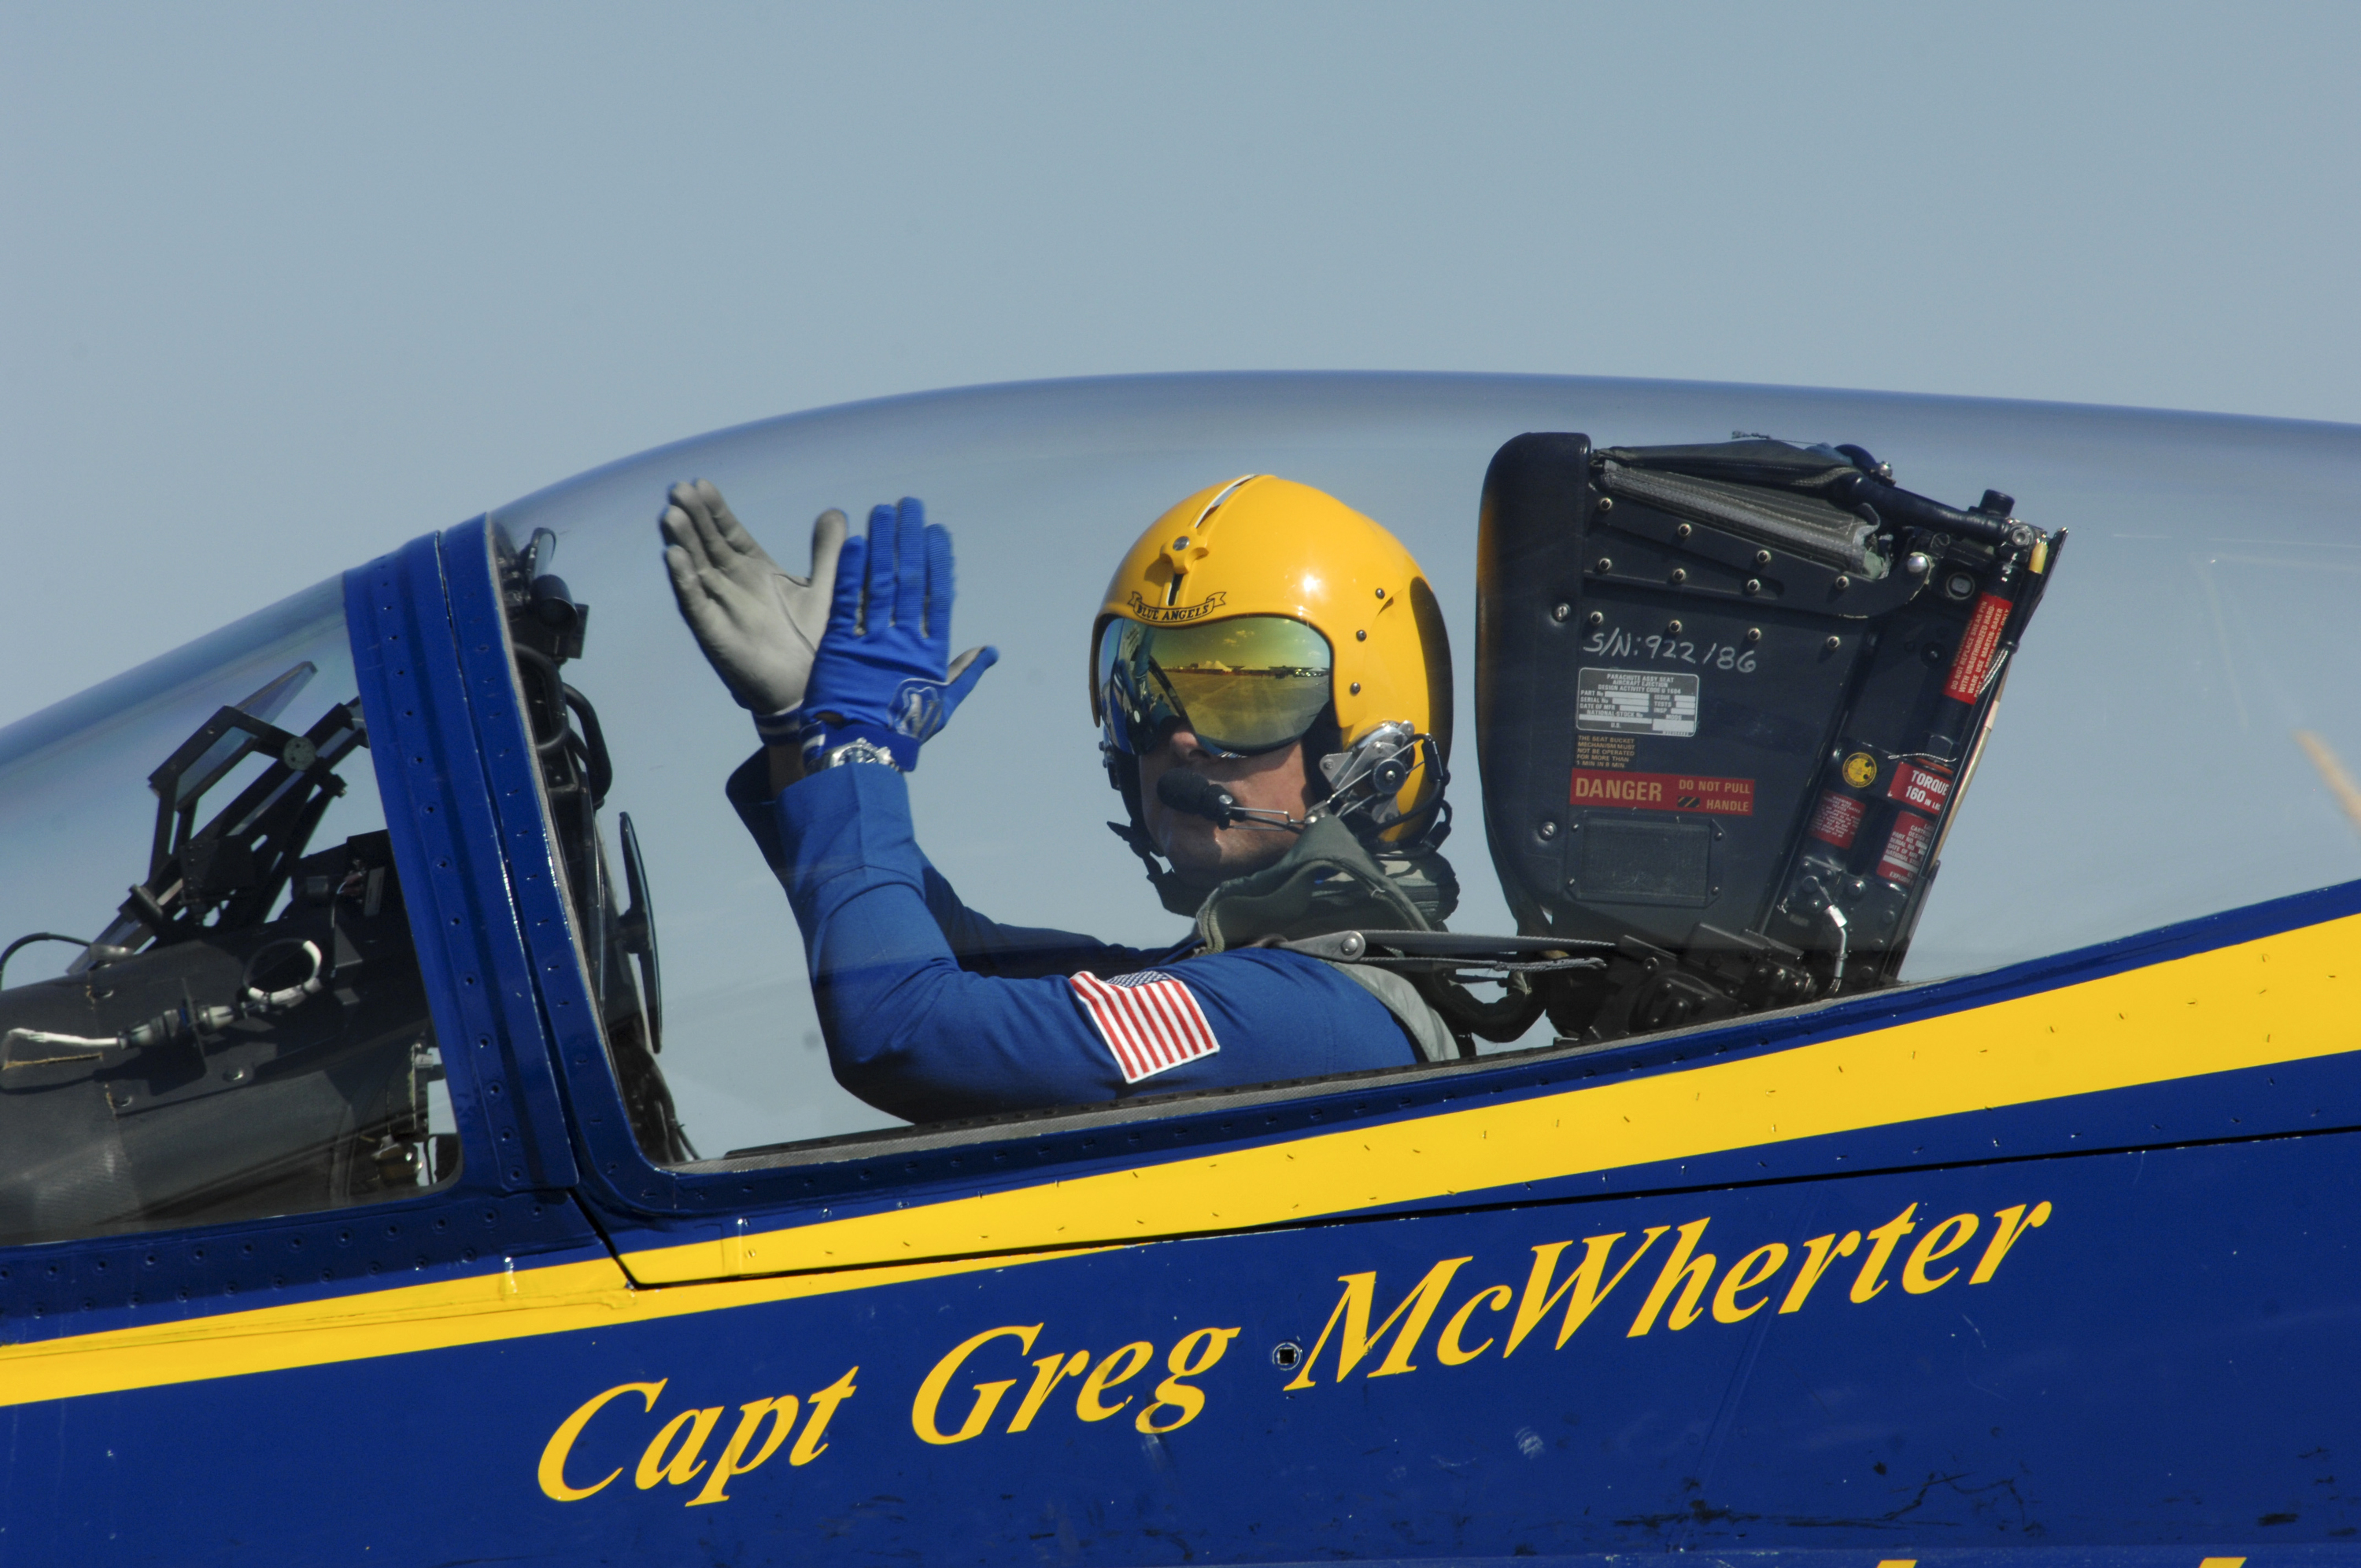 Capt. Greg McWherter, commanding officer and flight leader of the U.S. Navy flight demonstration squadron, the Blue Angels, responds to the crowd at the Guardians of Freedom Air Show in Lincoln, Neb., Sept. 10, 2011. (Jen Blake—U.S. Navy/AP)